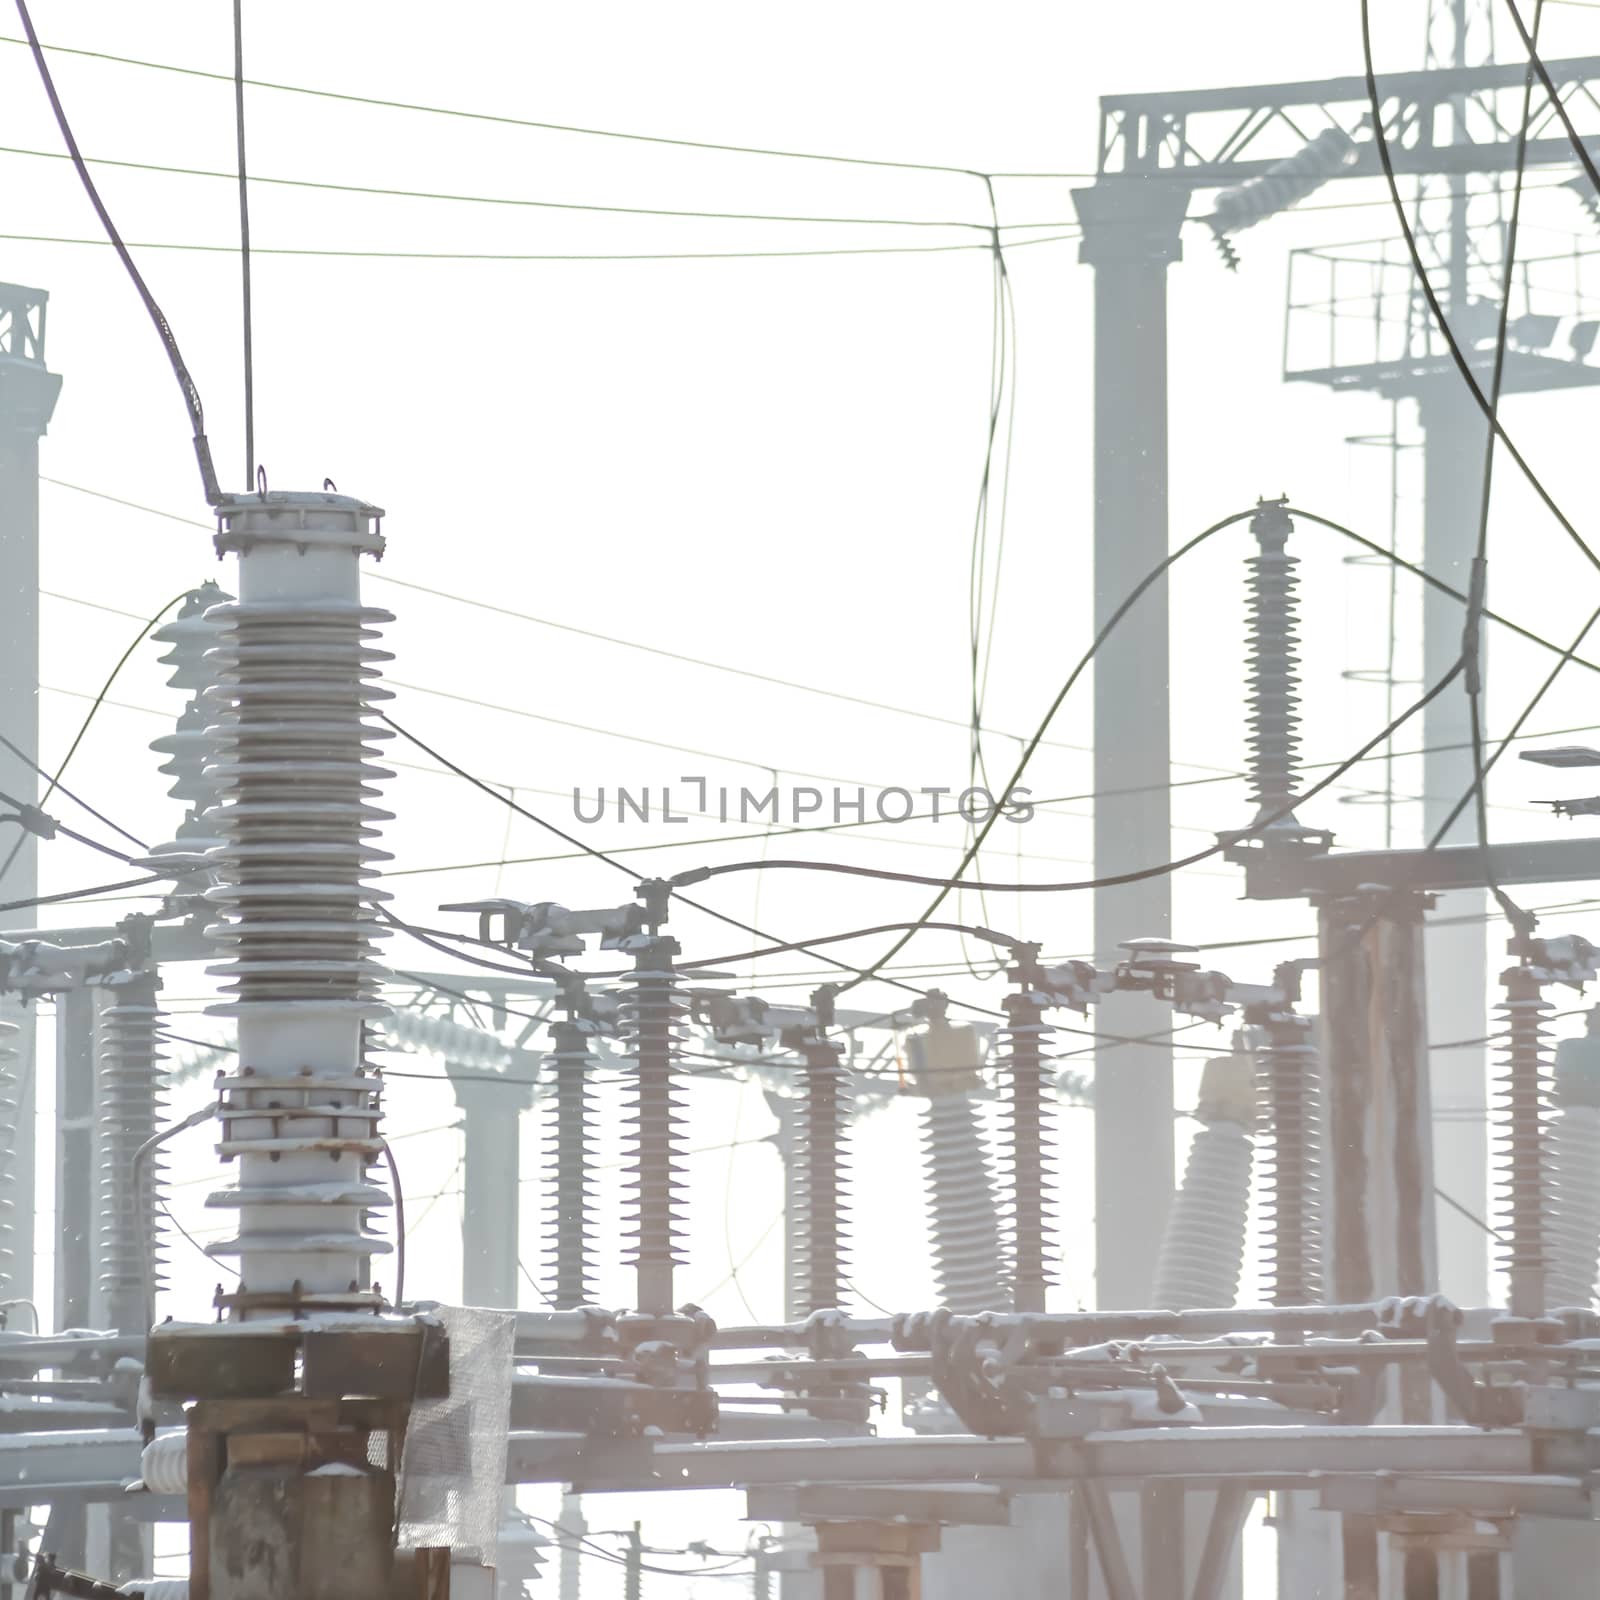 High voltage electric power substation in winter day